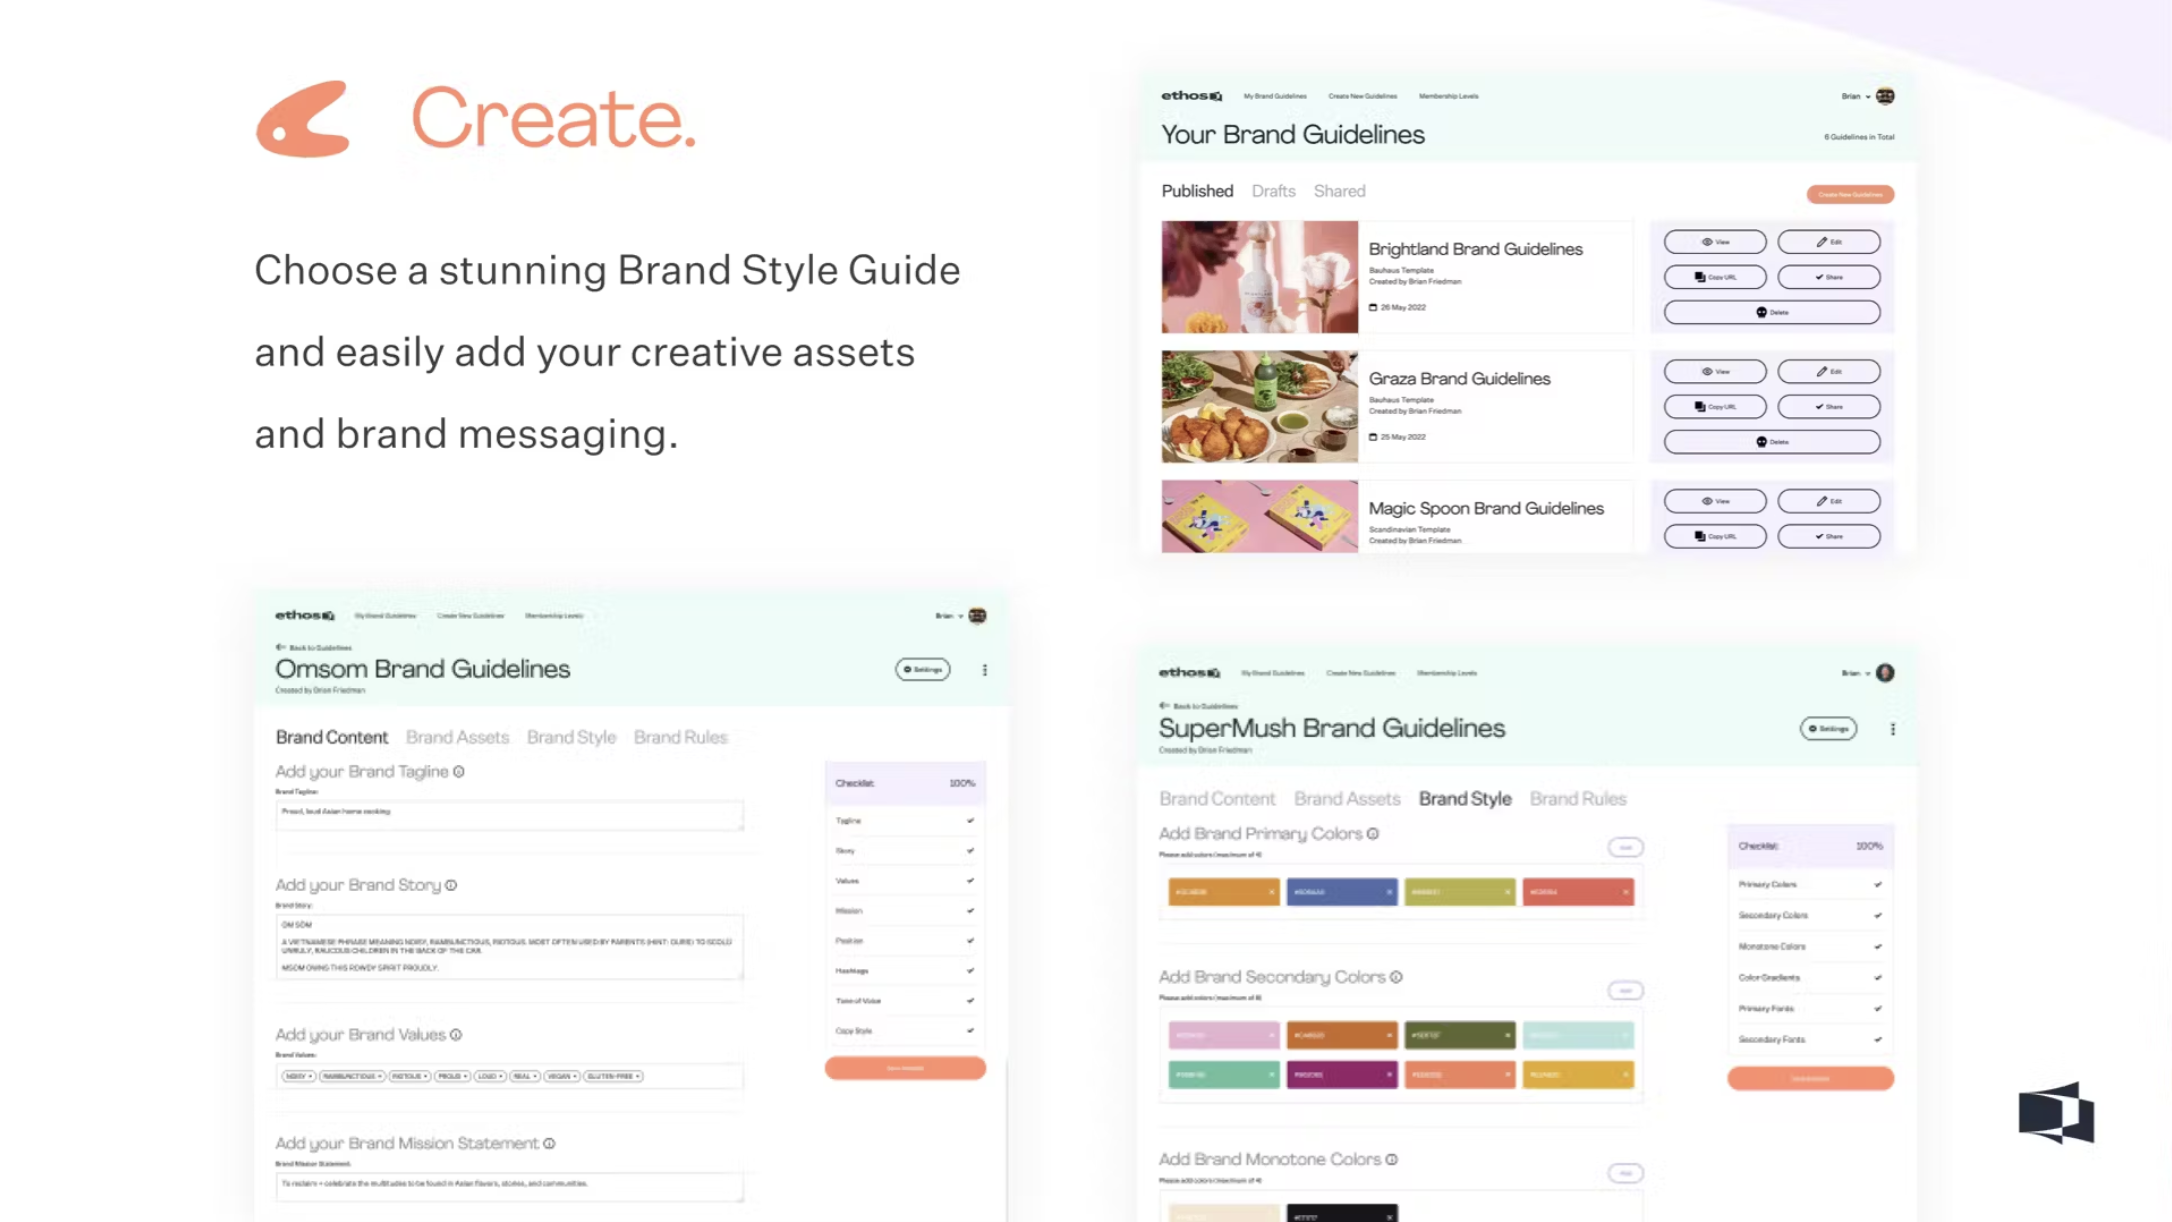 Create Your Brand Guideline: Choose a stunning Brand Style Guide and easily add your creative assets and brand messaging using AI.